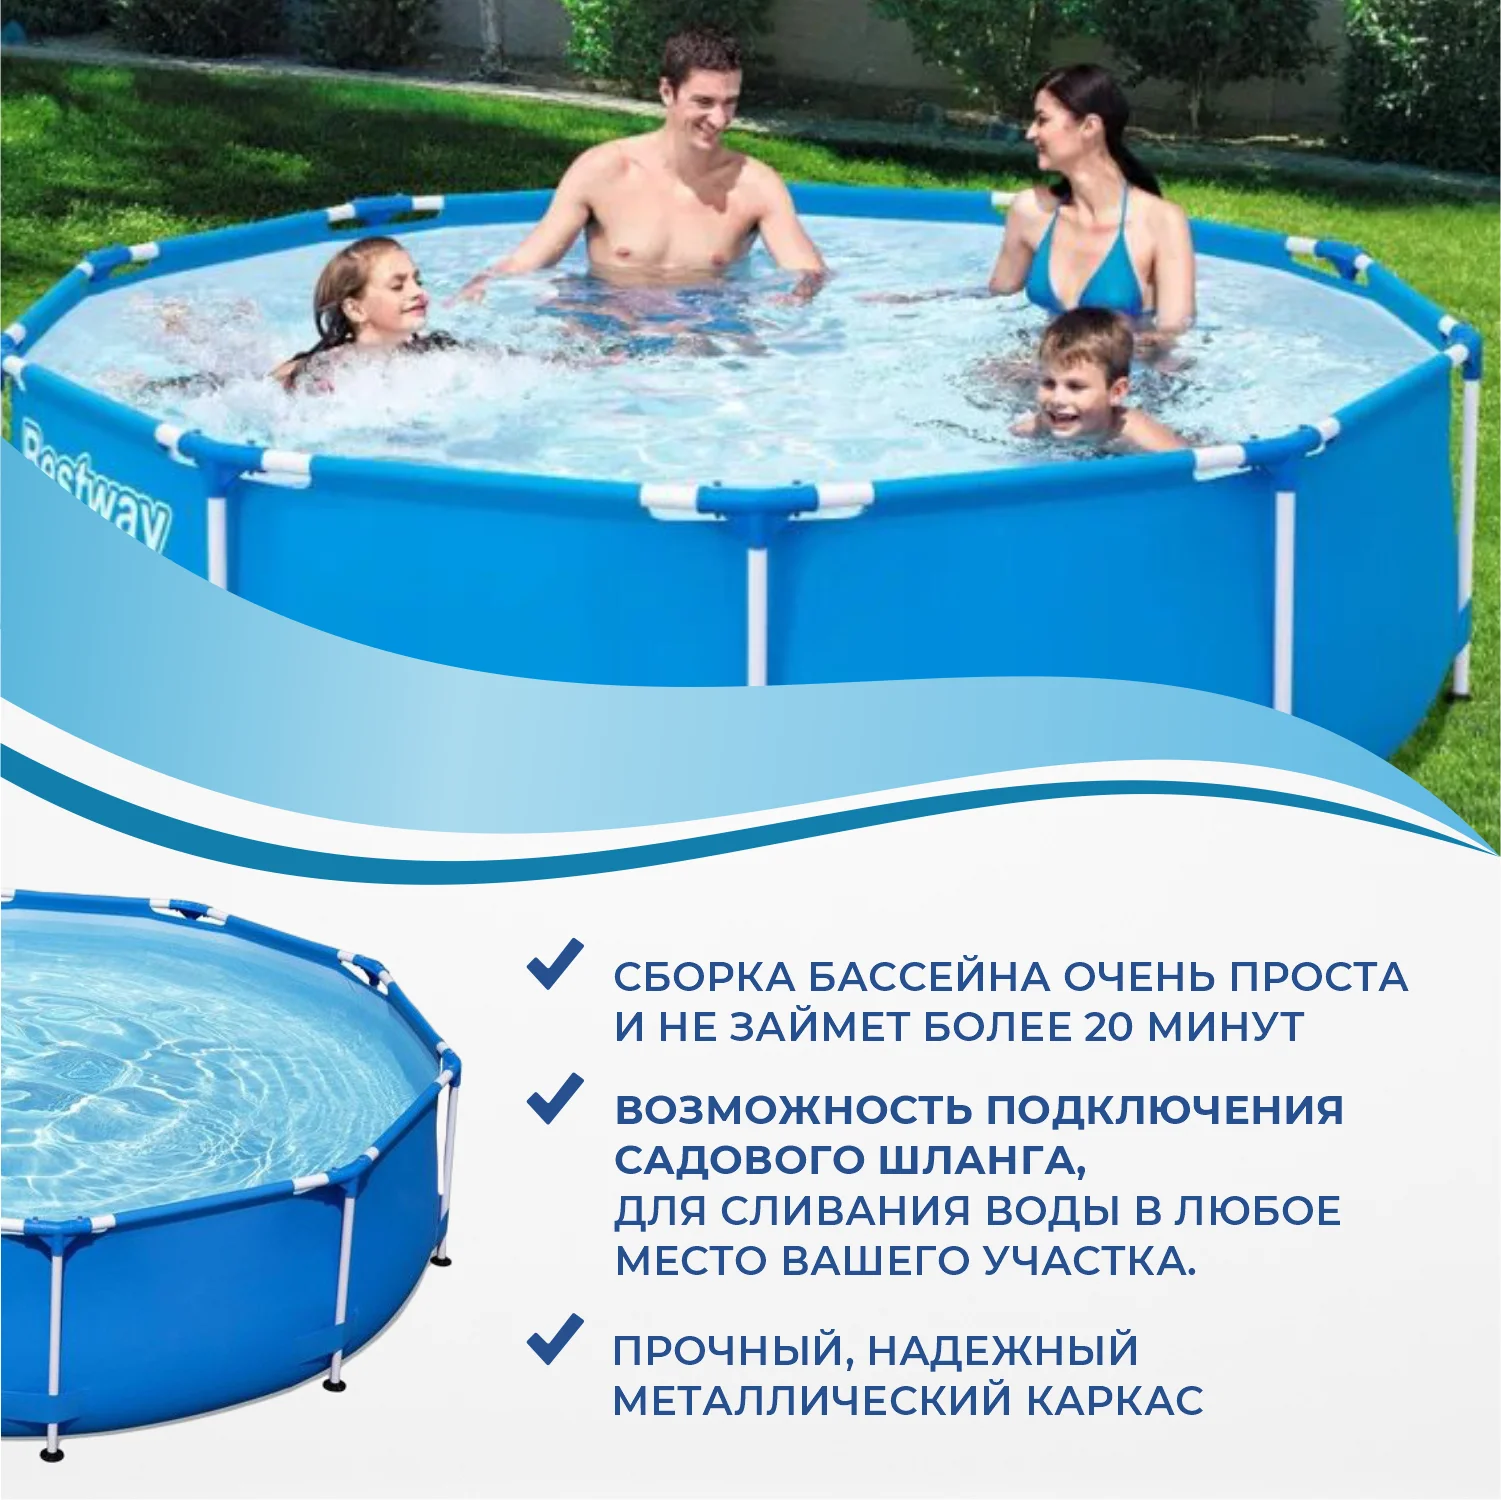 Frame Round Pool For Summer And Leisure Cottages, Size 244x76 Cm, Bestway,  Art. 5614c - Pool Accessories - AliExpress